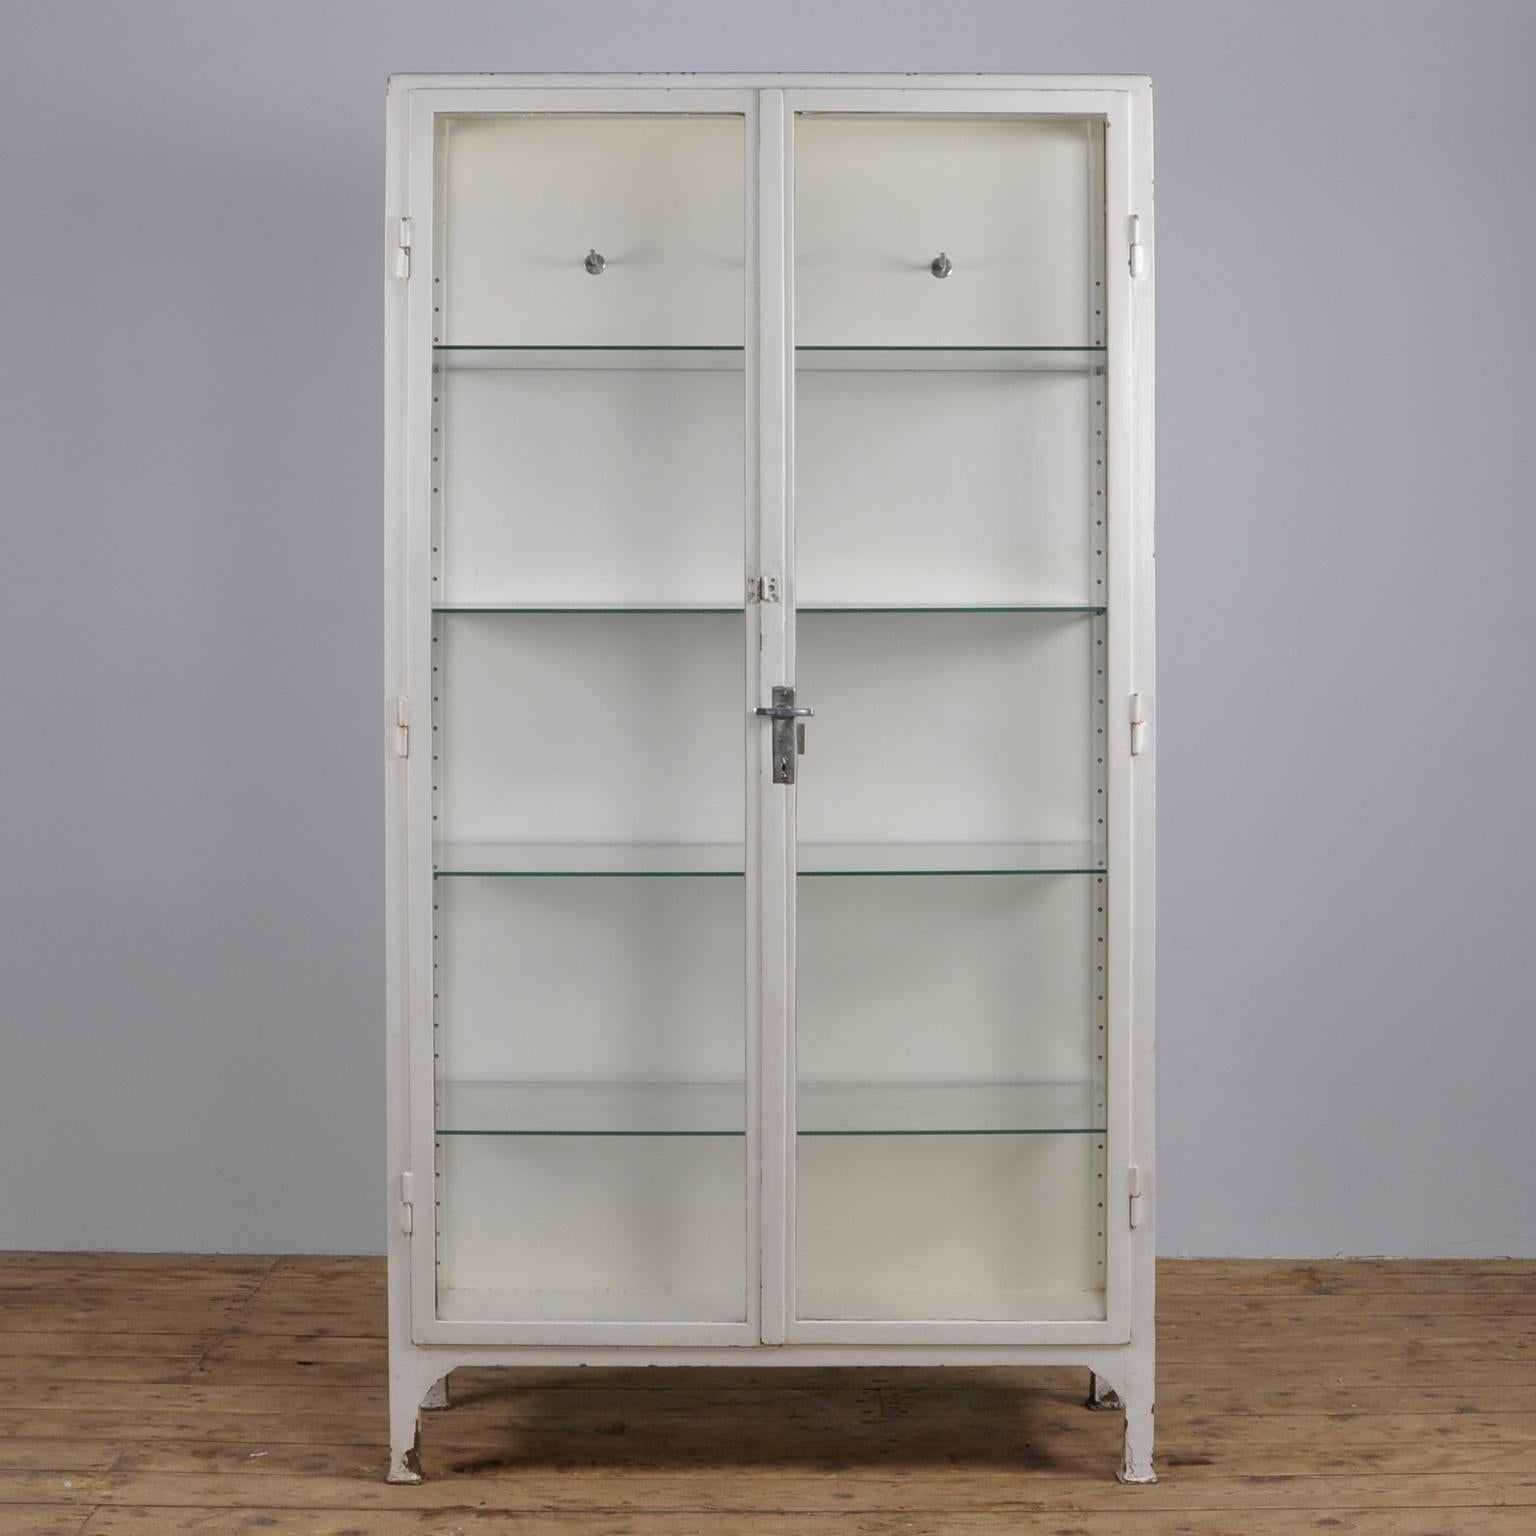 This medicine cabinet was produced in the 1950s in Hungary. The cabinet is made from thick iron and glass. It features four new glass shelves and three clothing hooks.